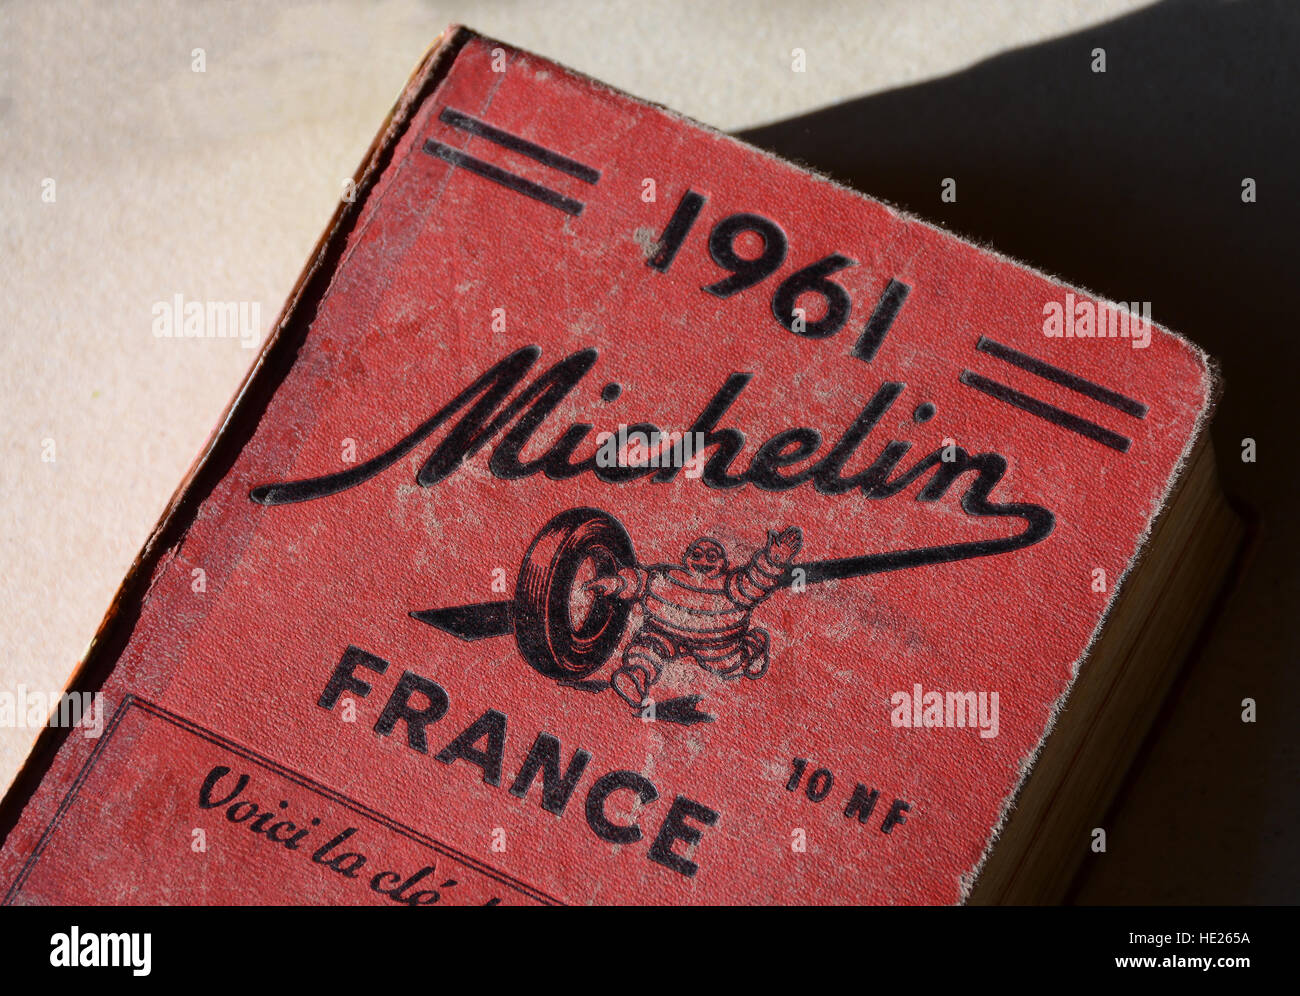 old Michelin red guide France french Stock Photo